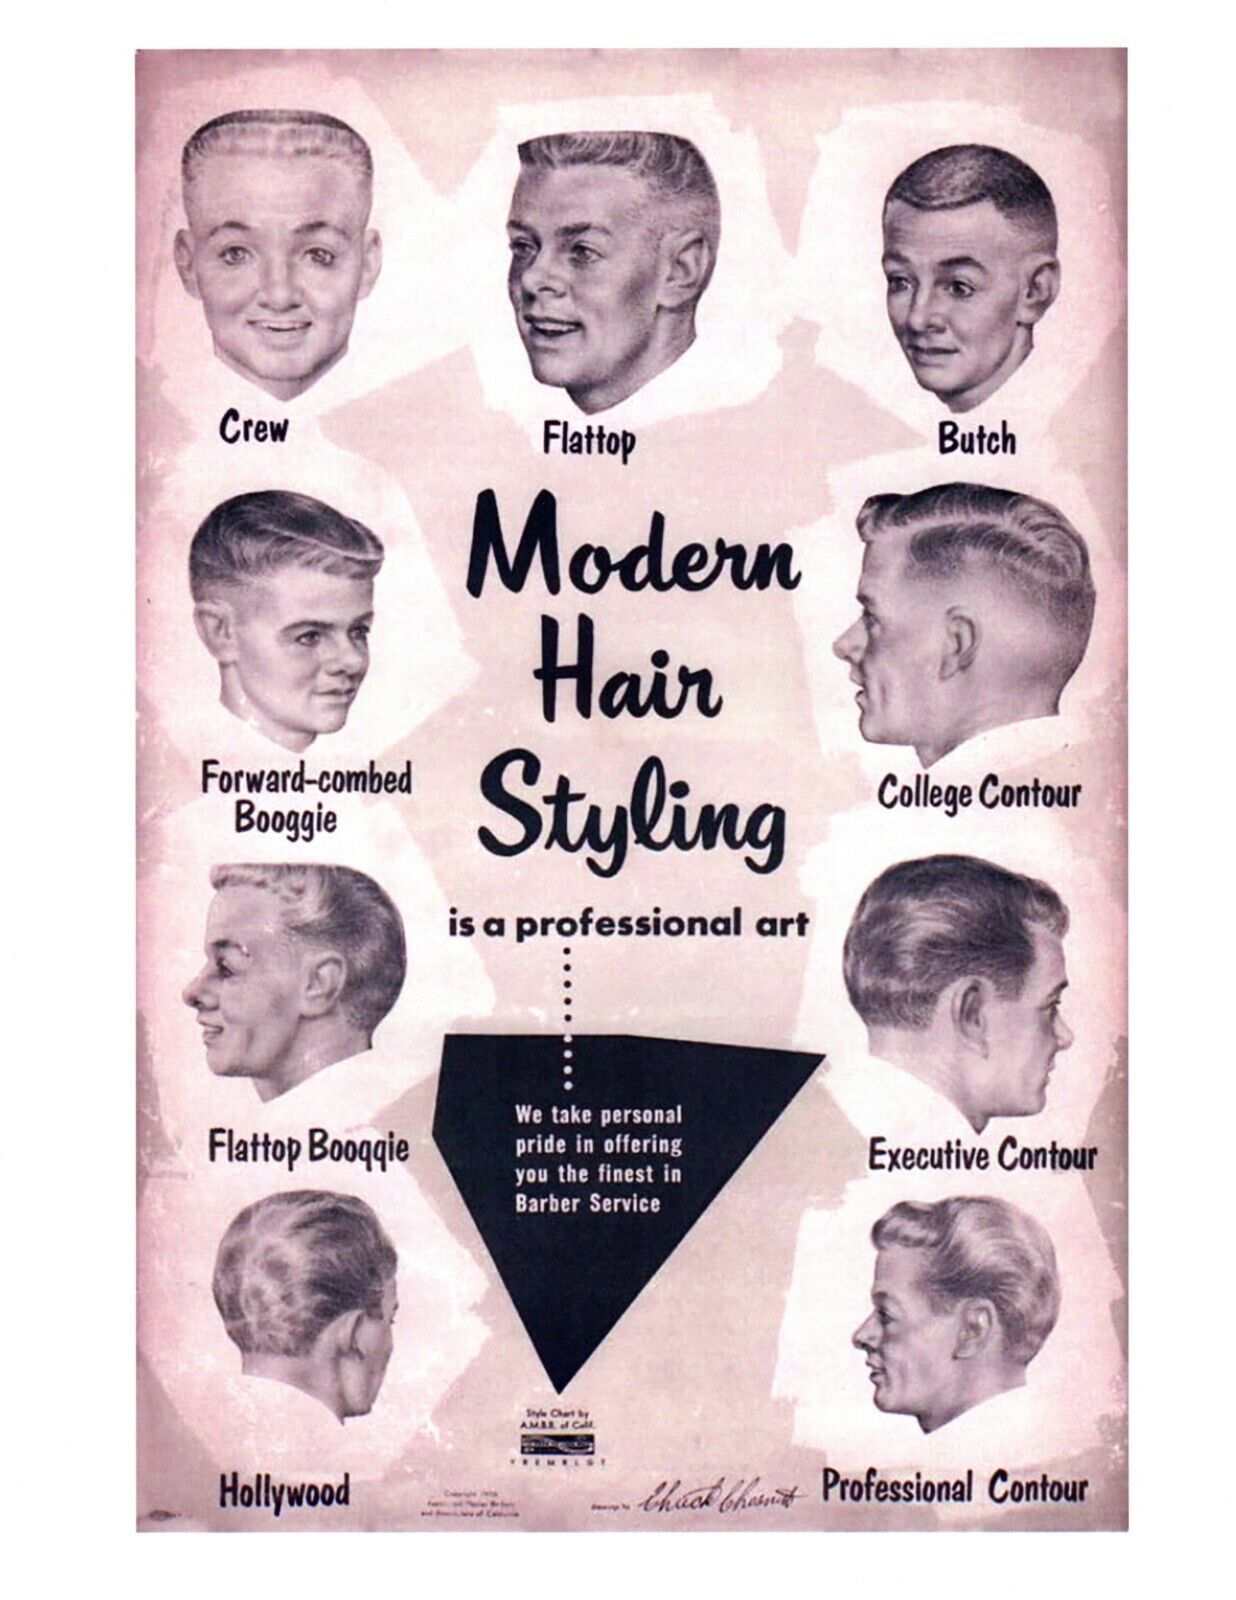 1950'S MODERN MENS HAIR STYLE CUT BARBER 8.5X11 GLOSSY PHOTO POSTER REPRO AD